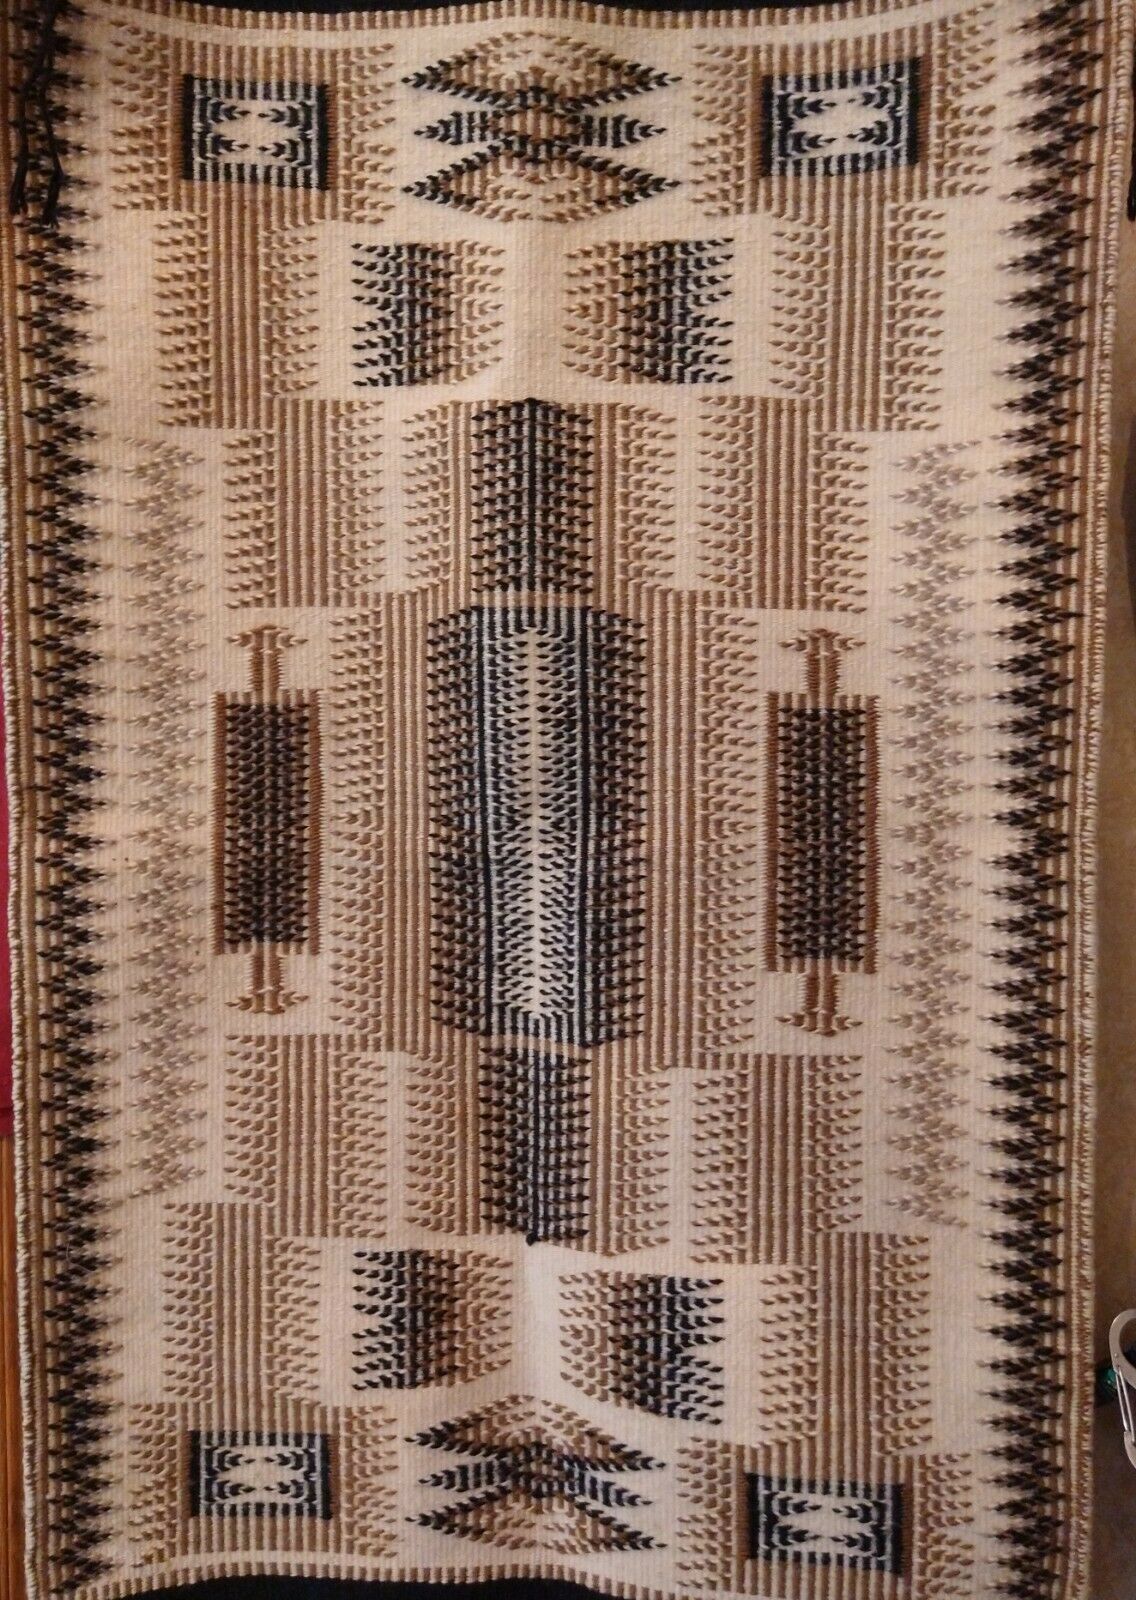 Vintage Handwoven Navajo Rug. Beautiful Rug, all materials from natural sources.